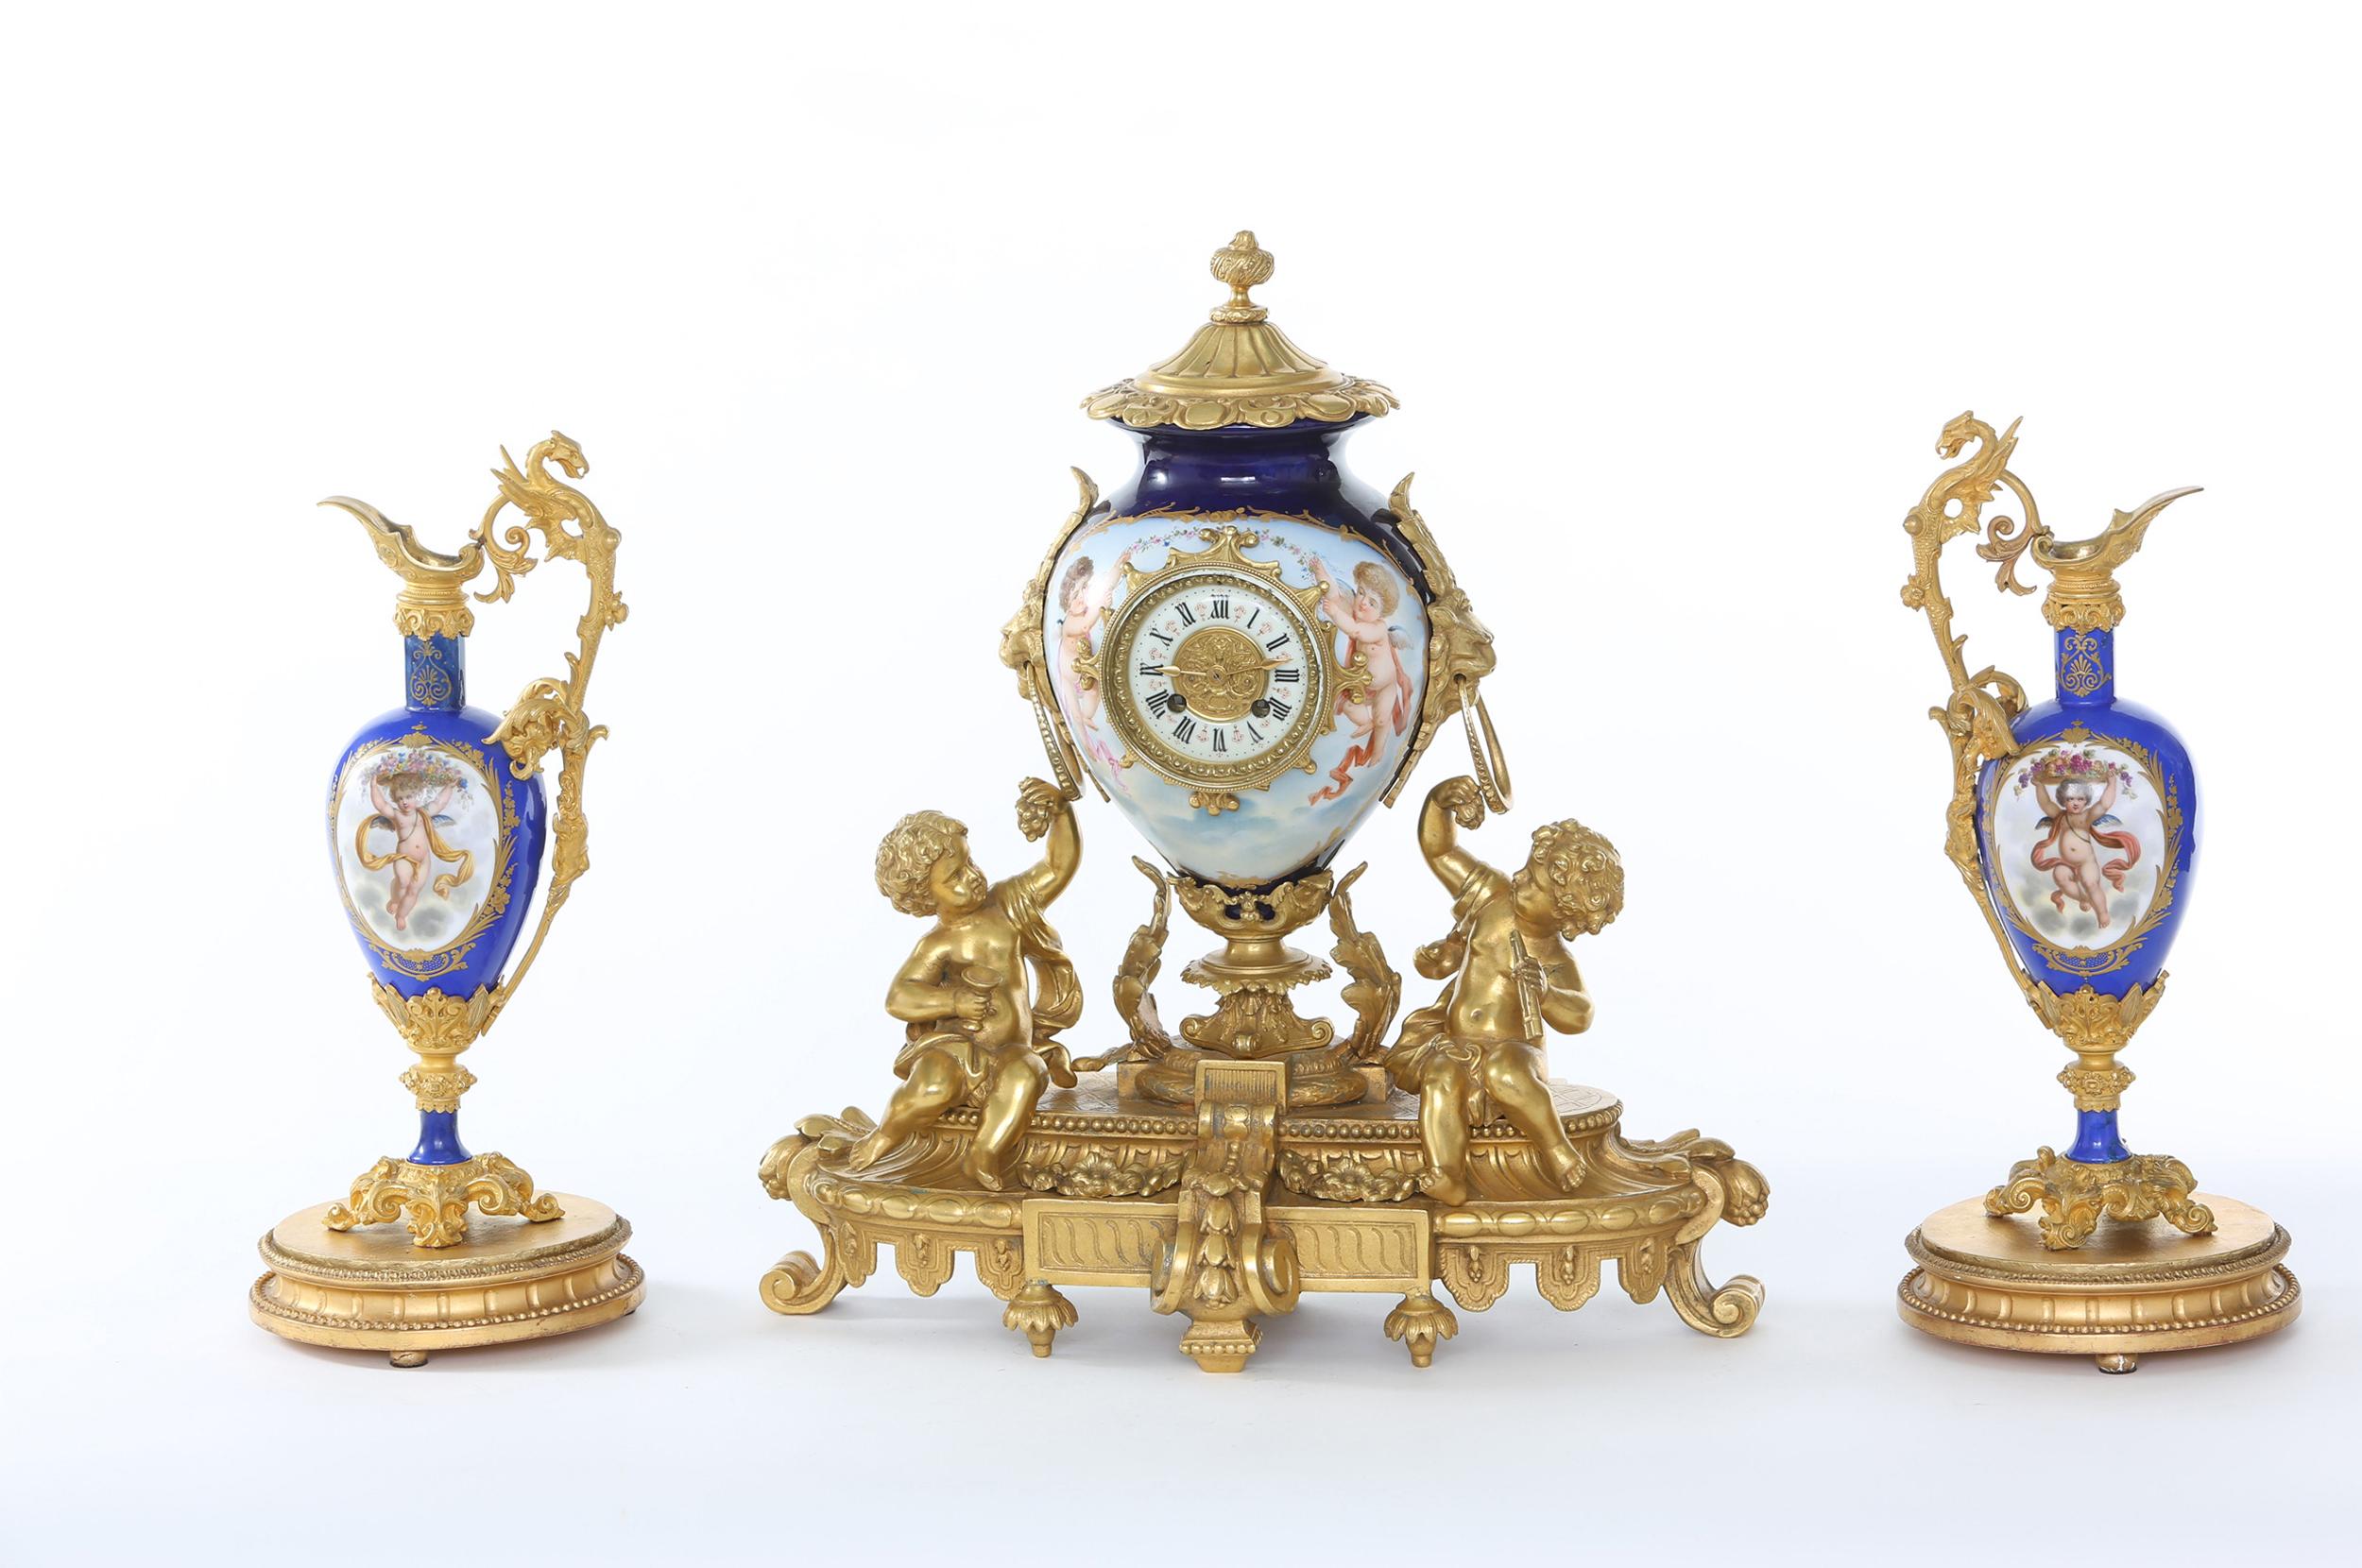 19th century Regency revival porcelain with gilt bronze mantel clock on stand with a pair of neoclassical revival ormolu mounted one handled amphora shaped ewers. The pieces are in great antique condition. Minor wear consistent with age / use. The